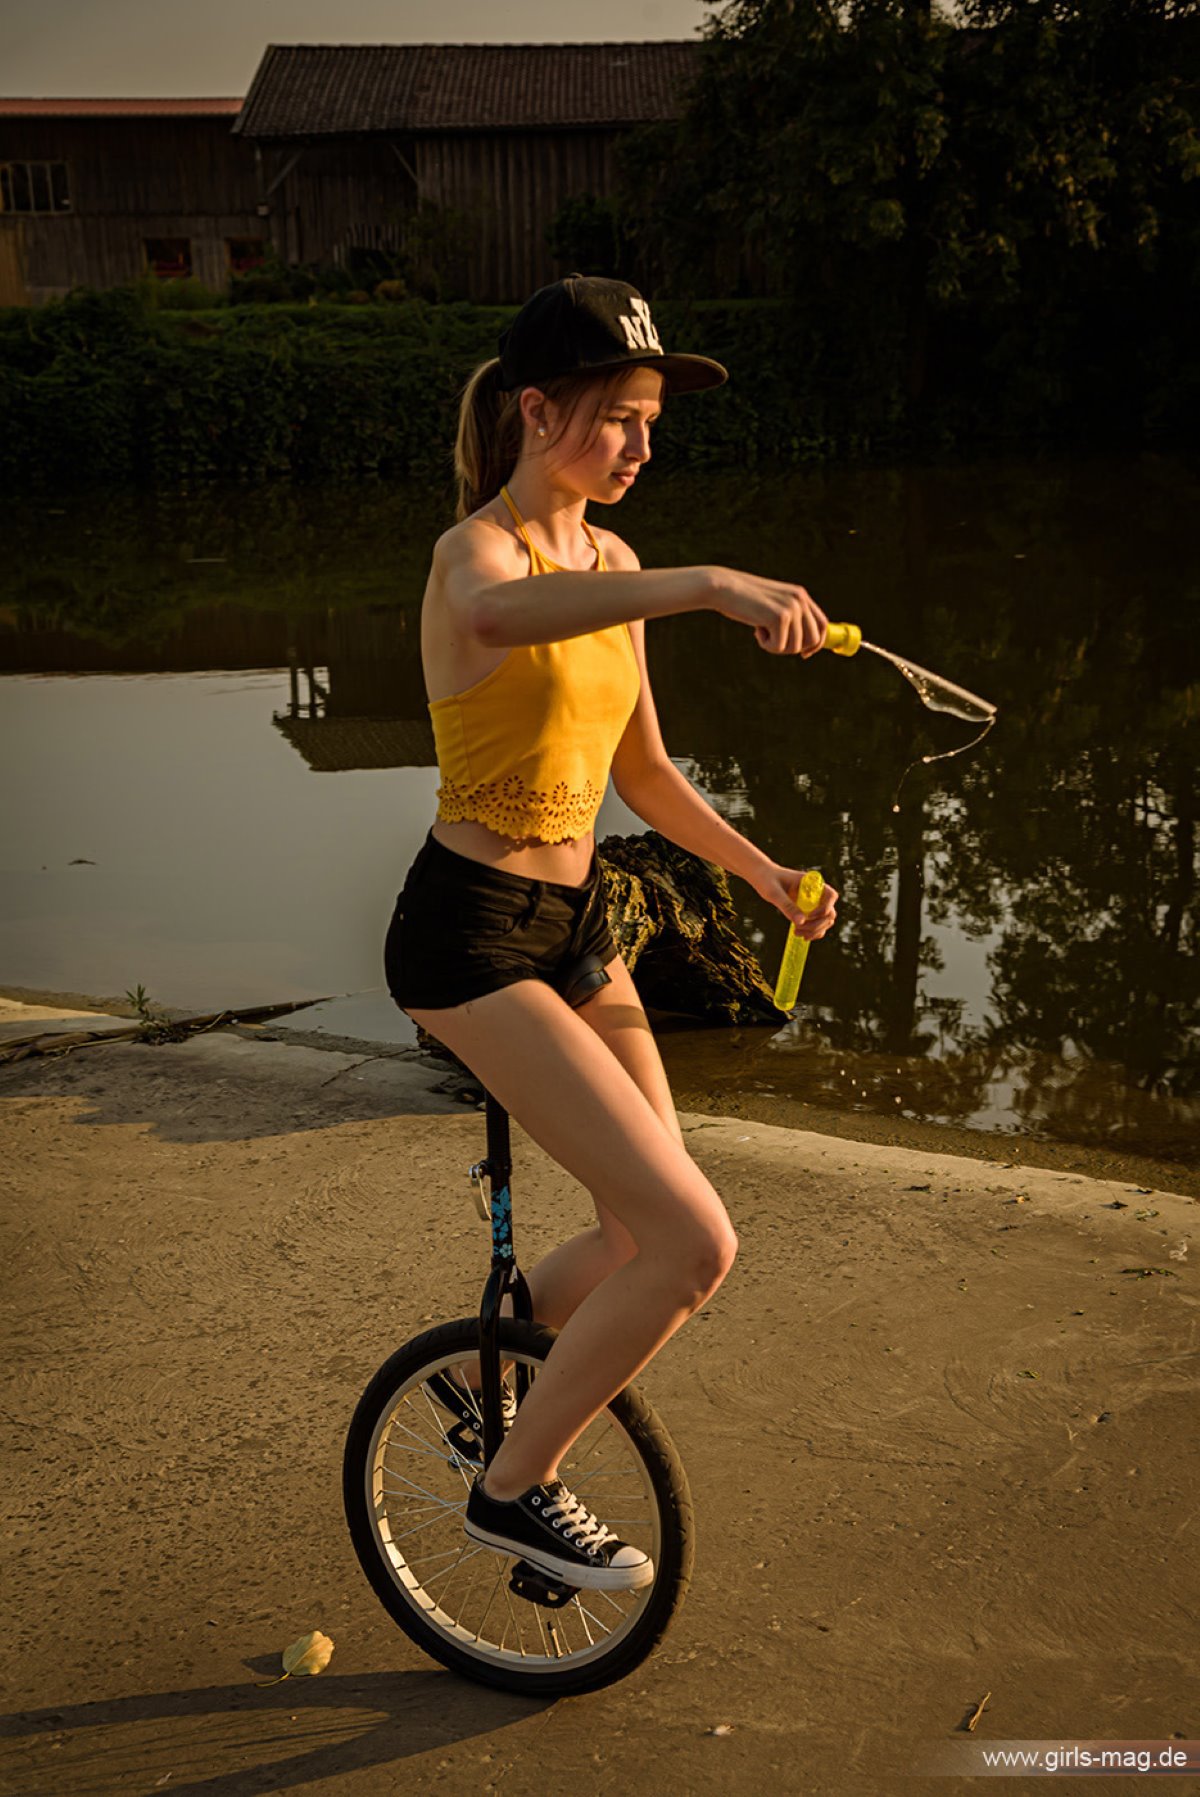 Girls Mag Annika Bubbles on a Unicycle 0090 2086523739.jpg